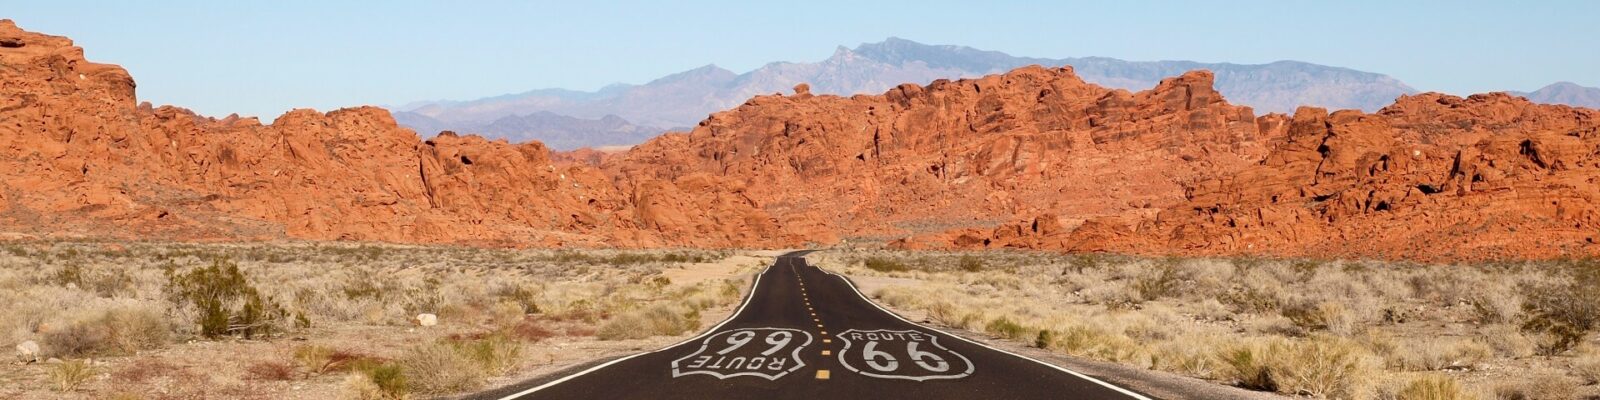 A Guide to Route 66 “The Best Bits”